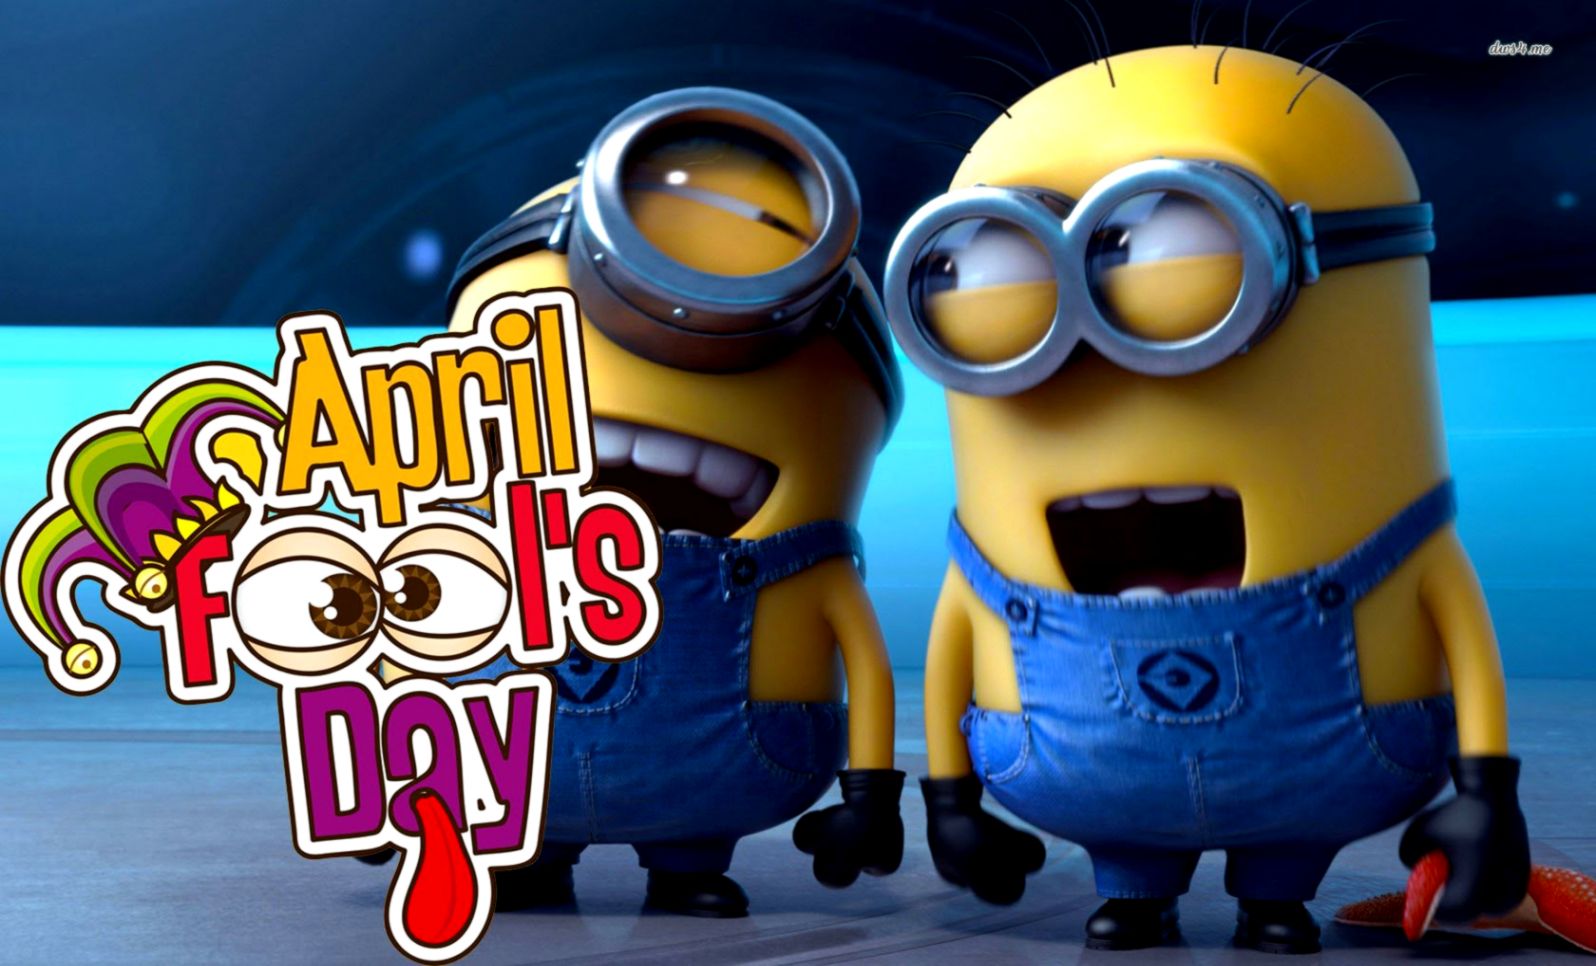 April Fool Pranks Images Wallpapers & Photos For Whatsapp - April Fools Day  Minions - 1596x966 Wallpaper 